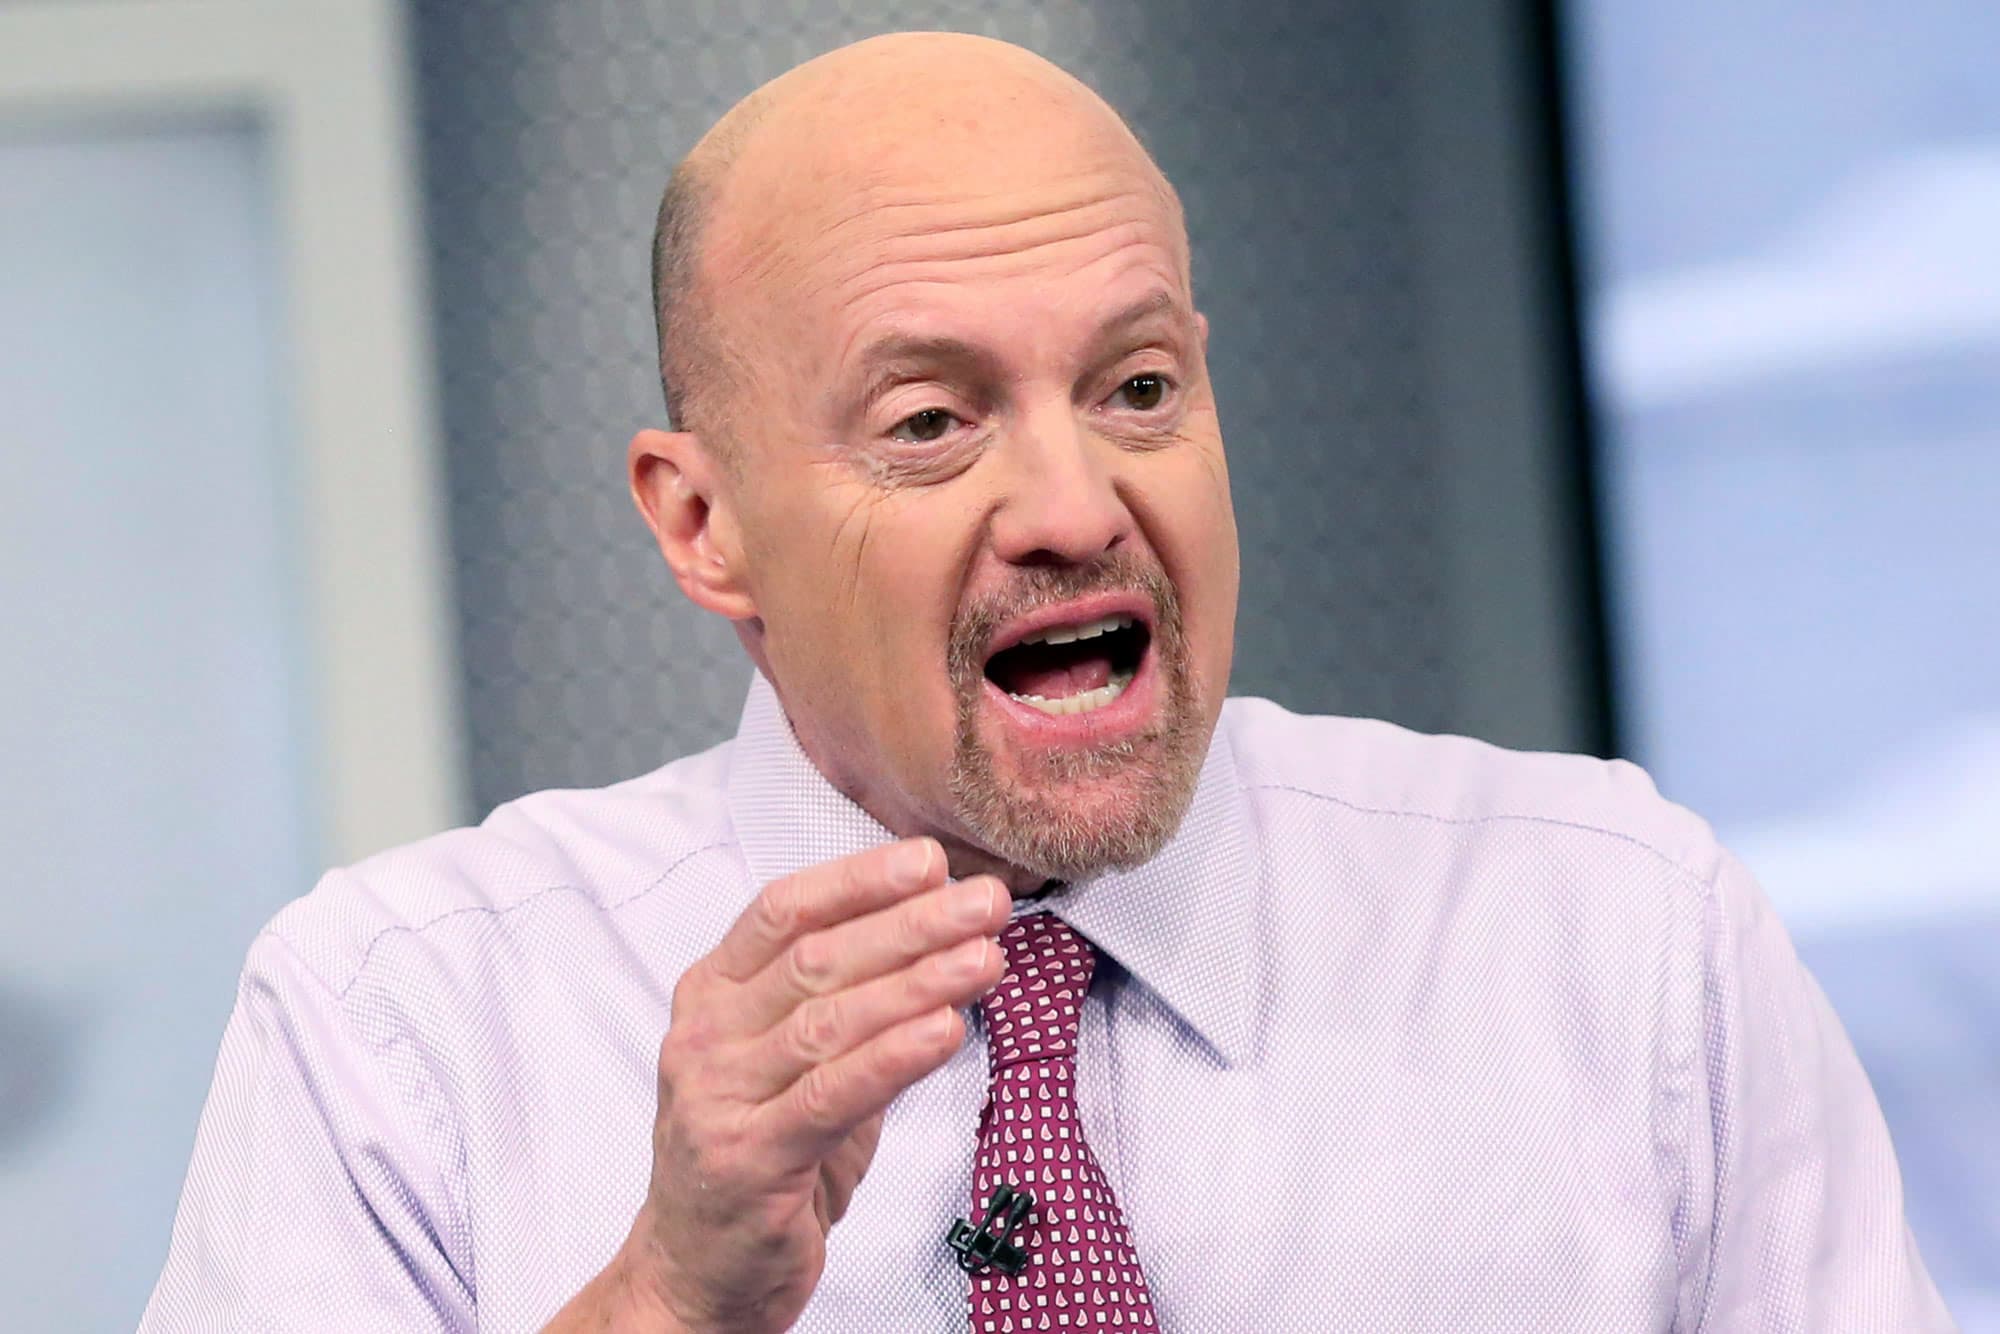 Cramer broadly agrees with Bank of America’s bullish analysis, says next year could bring gains for the S&P 500